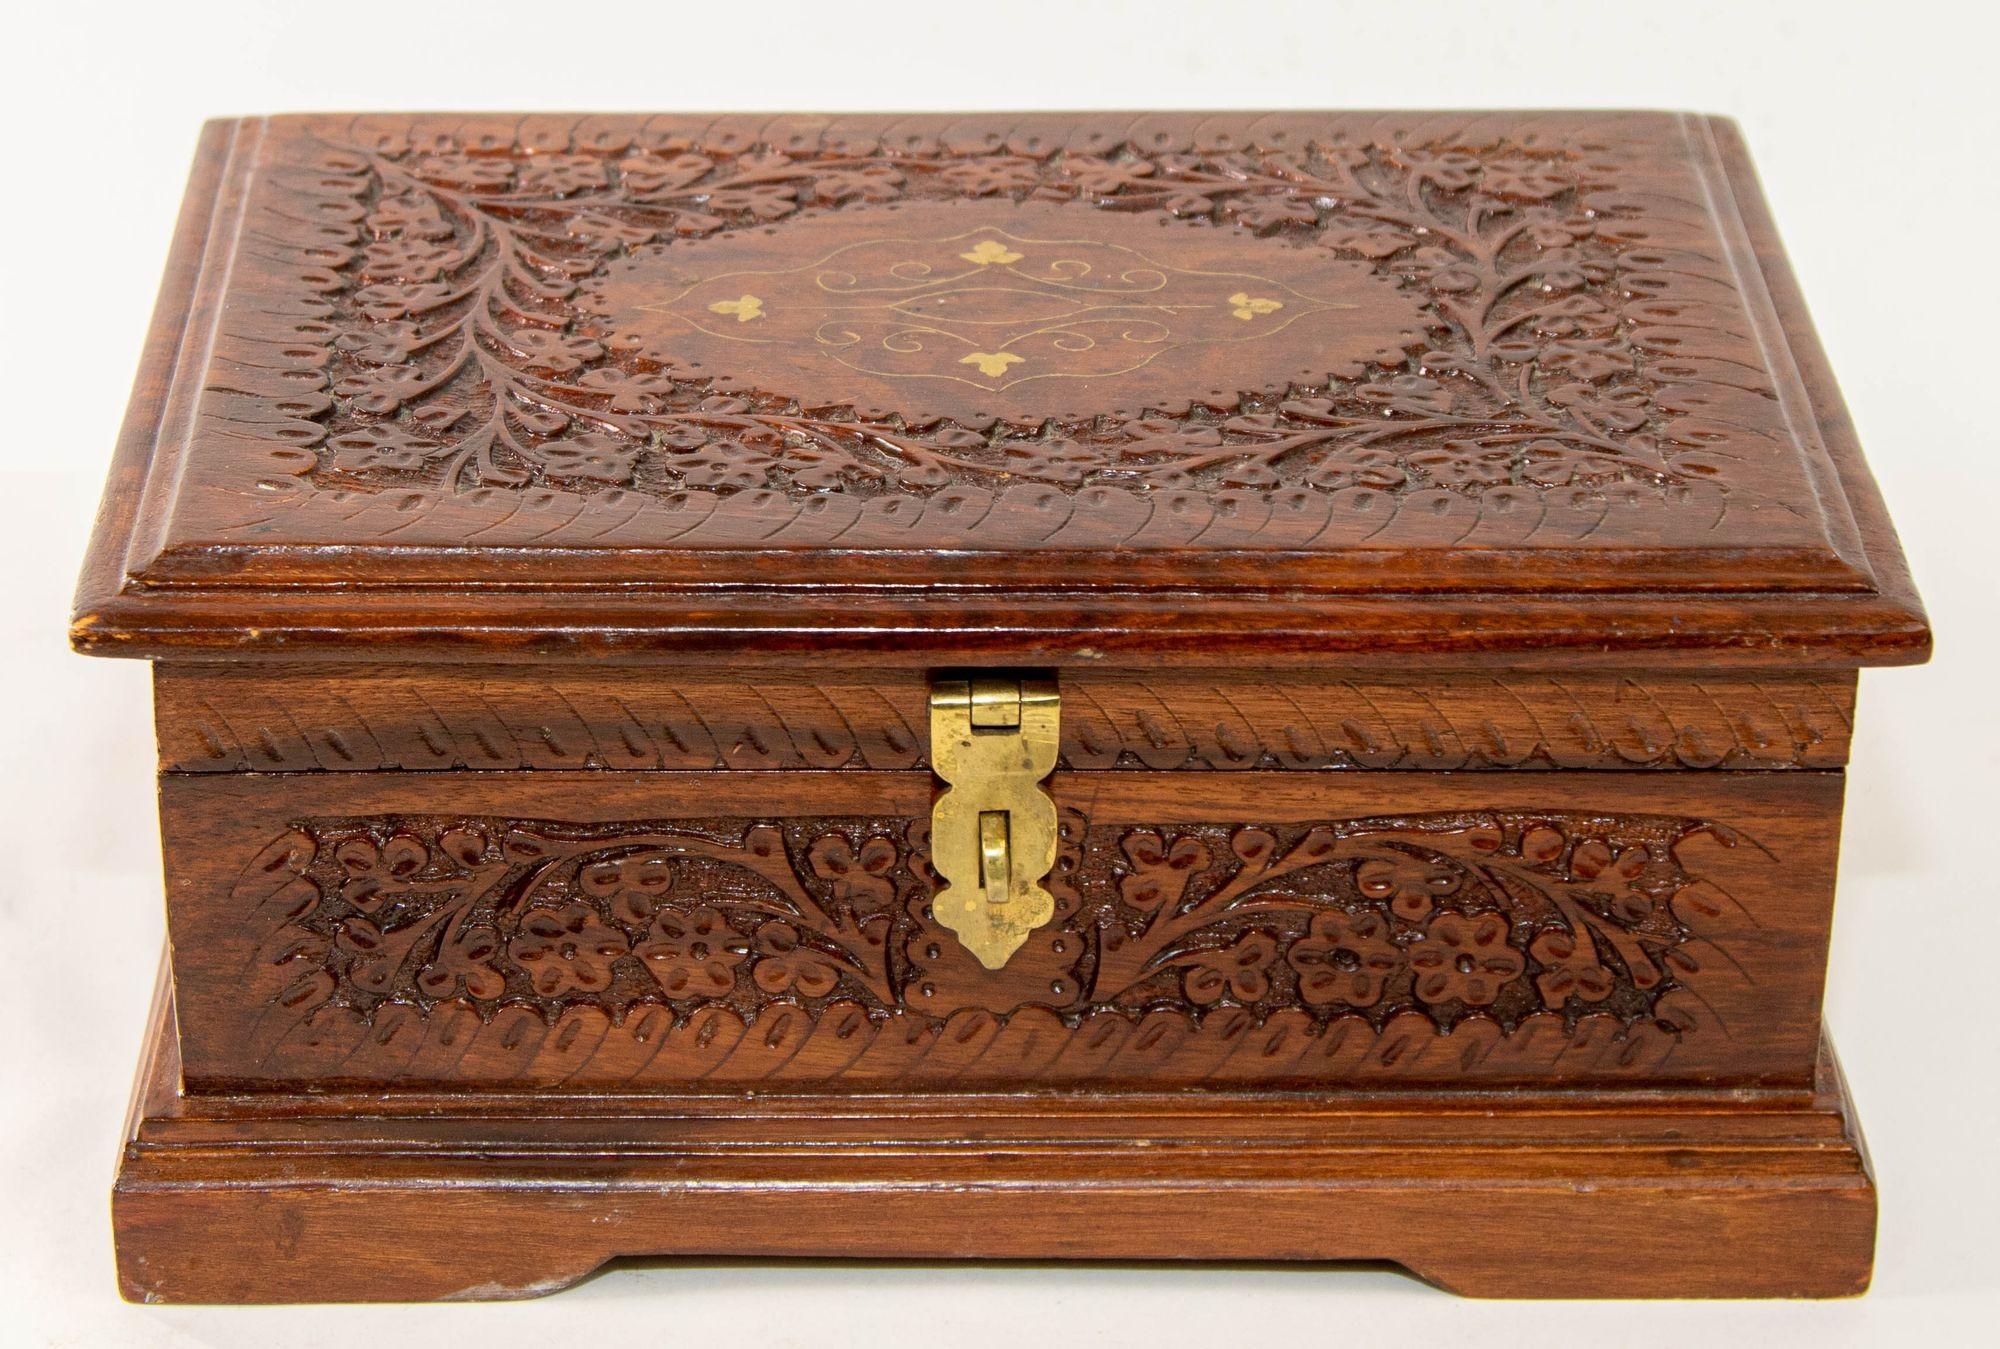 Vintage hand carved wood jewelry trinket storage box with brass inlaid.
Hand-carved large wooden Anglo-Raj jewelry box. Found in Kashmir, India.
Mid 20th century wood box richly decorated overall with arabesques and floral carving. 
Vintage trinket